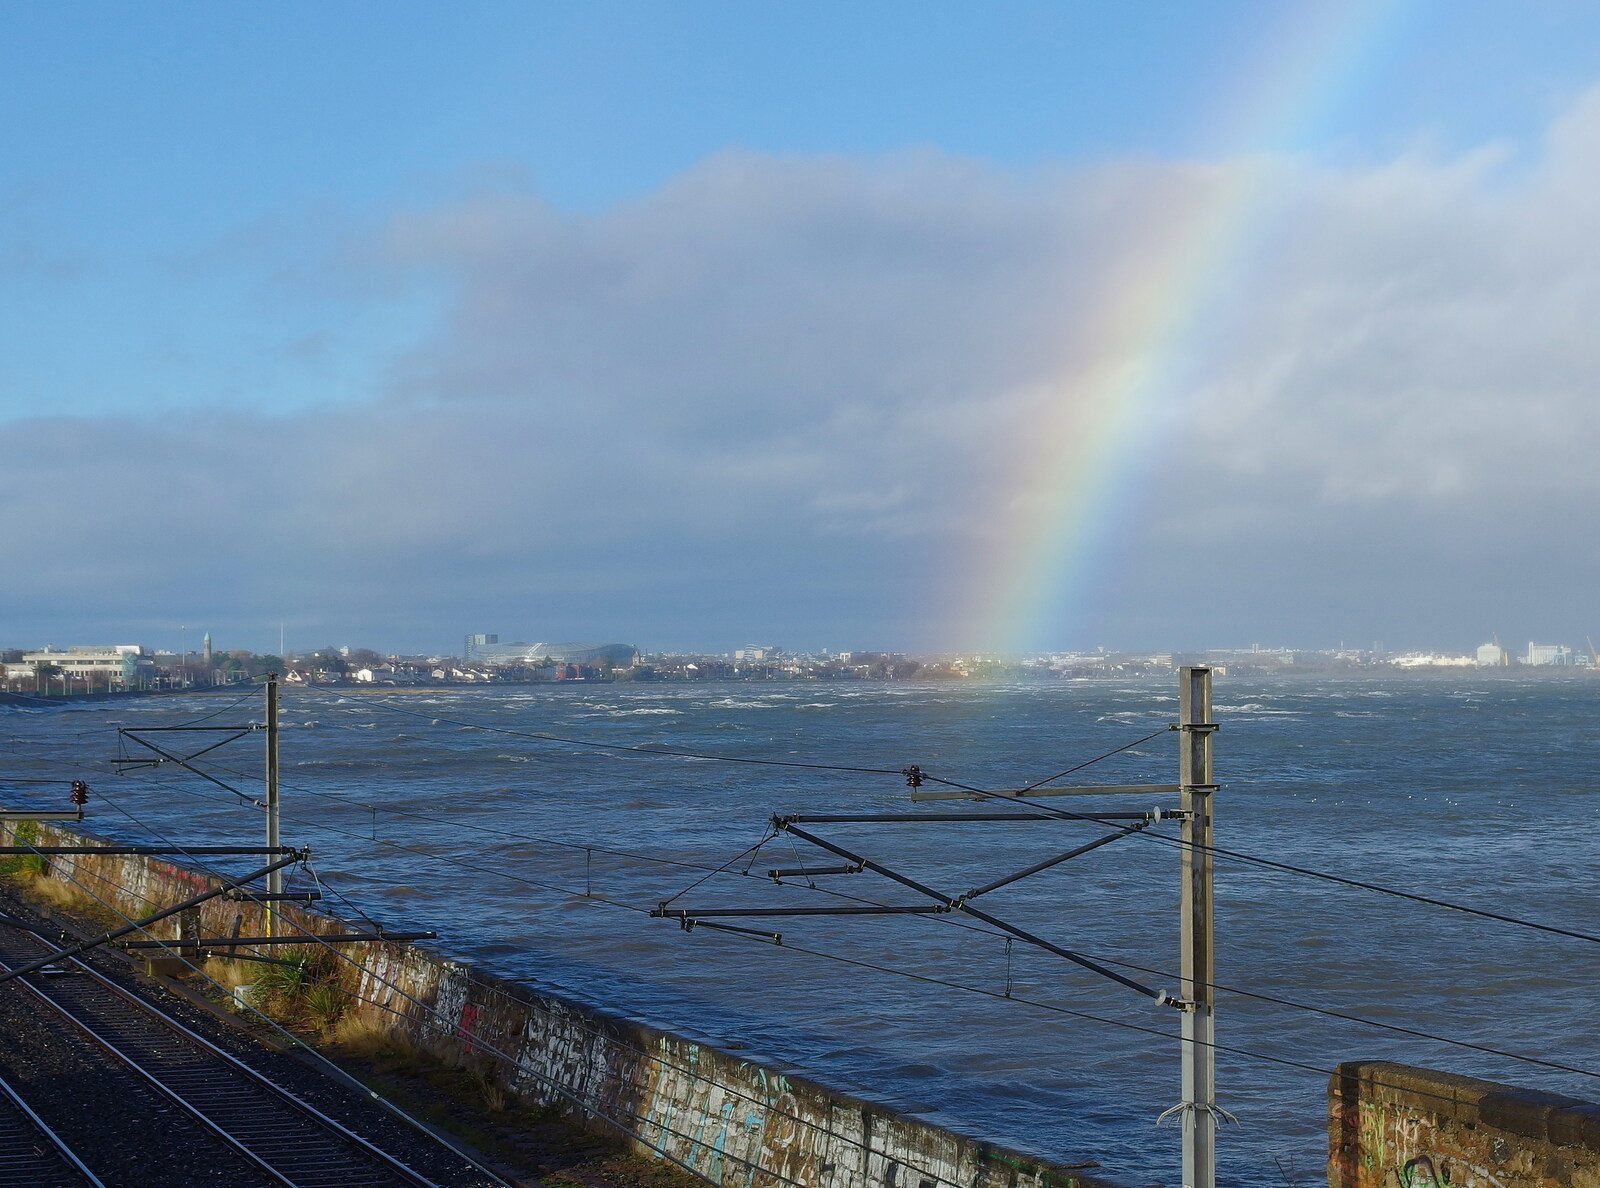 The rainbow seems to end on the DART pylon from Dun Laoghaire and an Electrical Disaster, Monkstown, County Dublin, Ireland - 4th January 2014